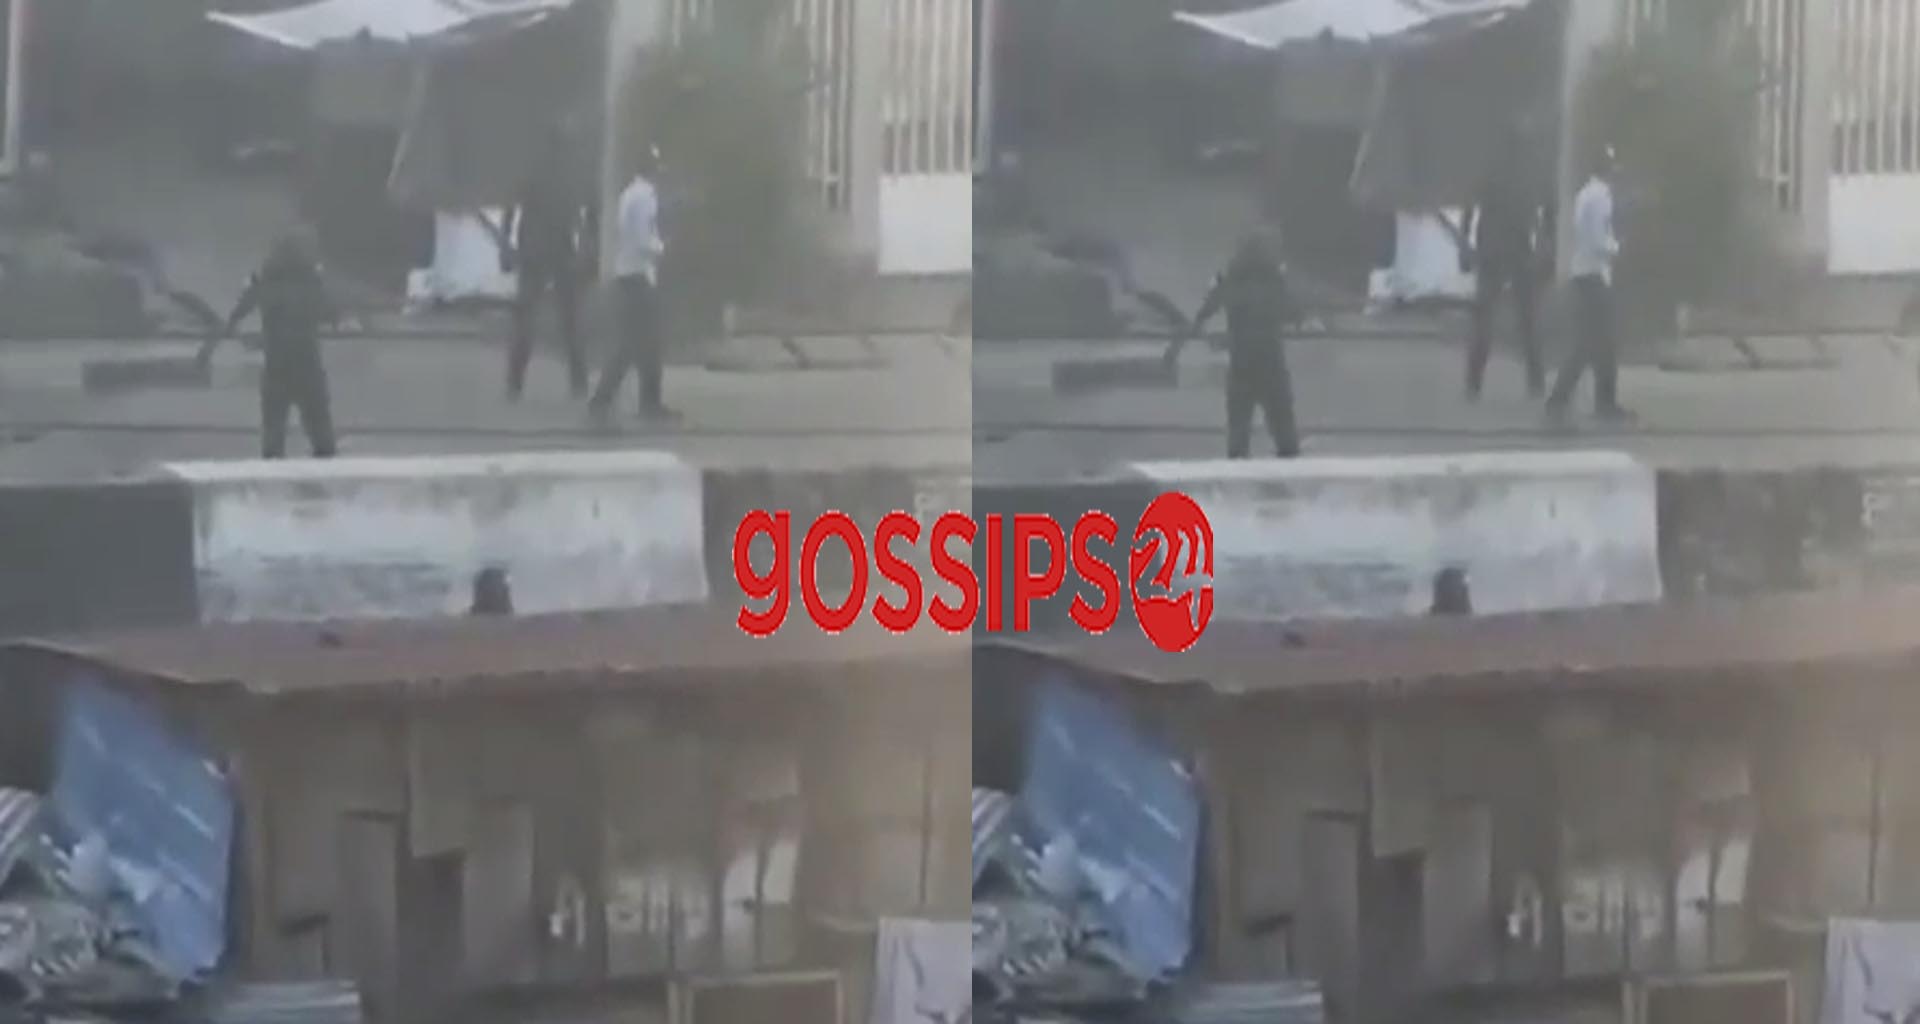 Policemen caught on camera shooting directly at people in Lagos